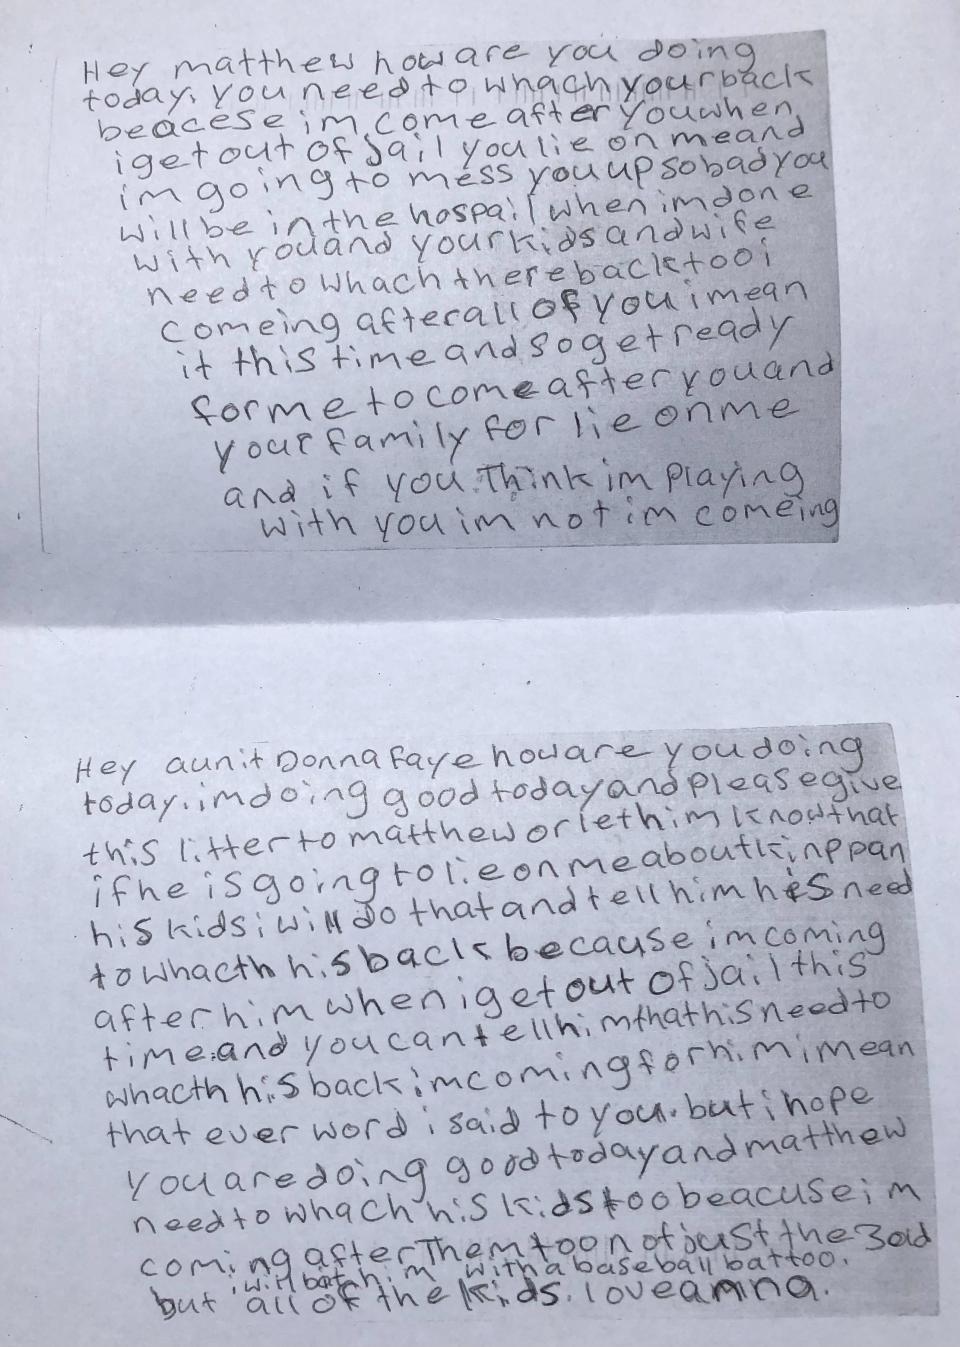 A letter allegedly sent by Anna Catherine Haney to her aunt, Donna Gardener, threatening to kill her cousin Matthew Gardner's son and his family. Kimberly C. Moore/The Ledger